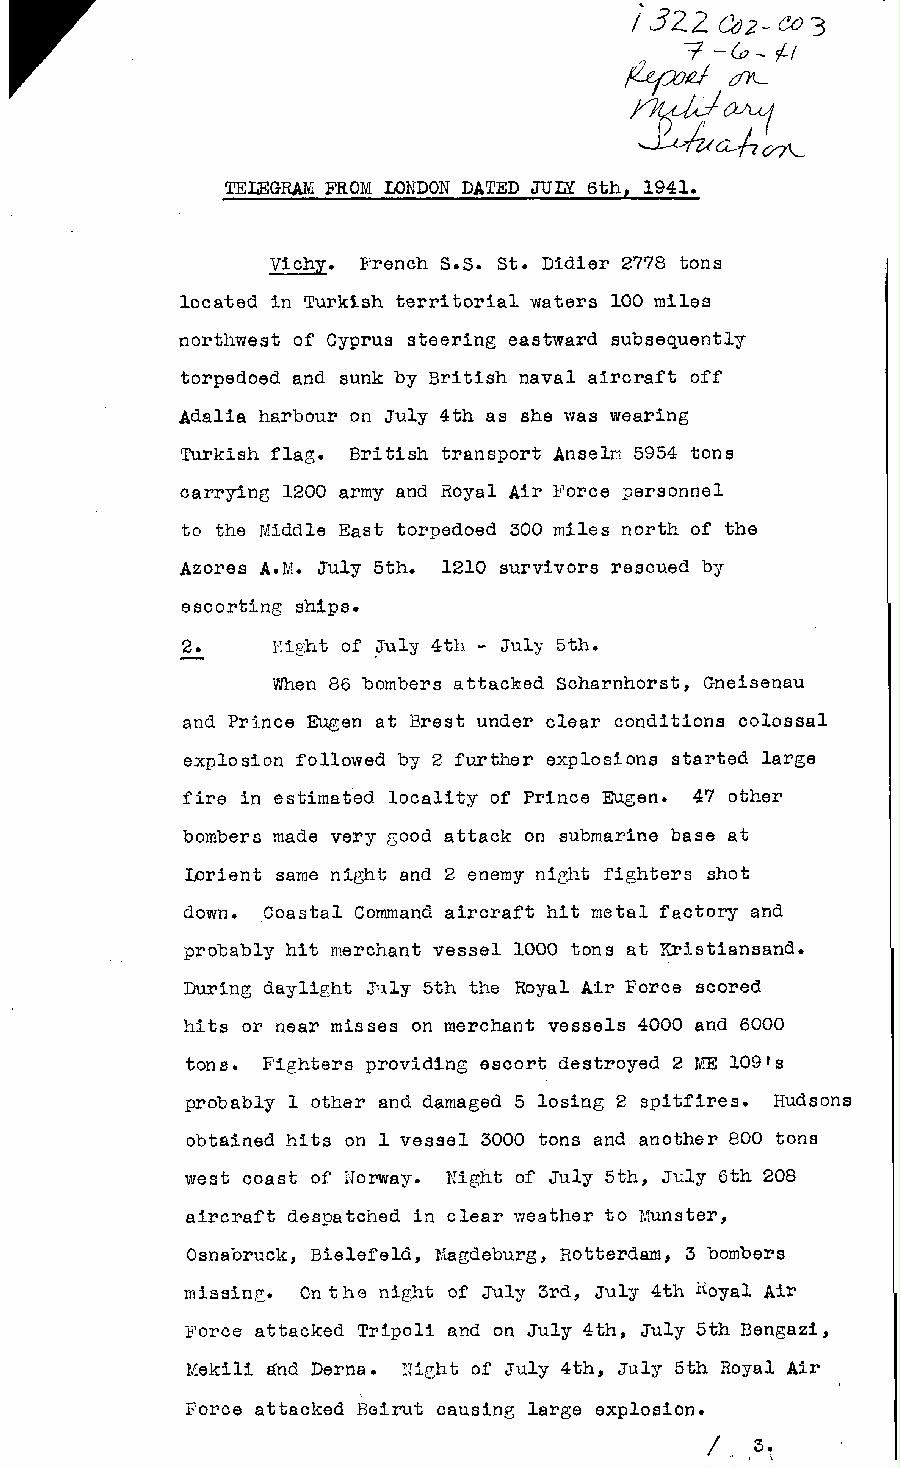 [a322c02.jpg] - Report on military situation 7/6/41